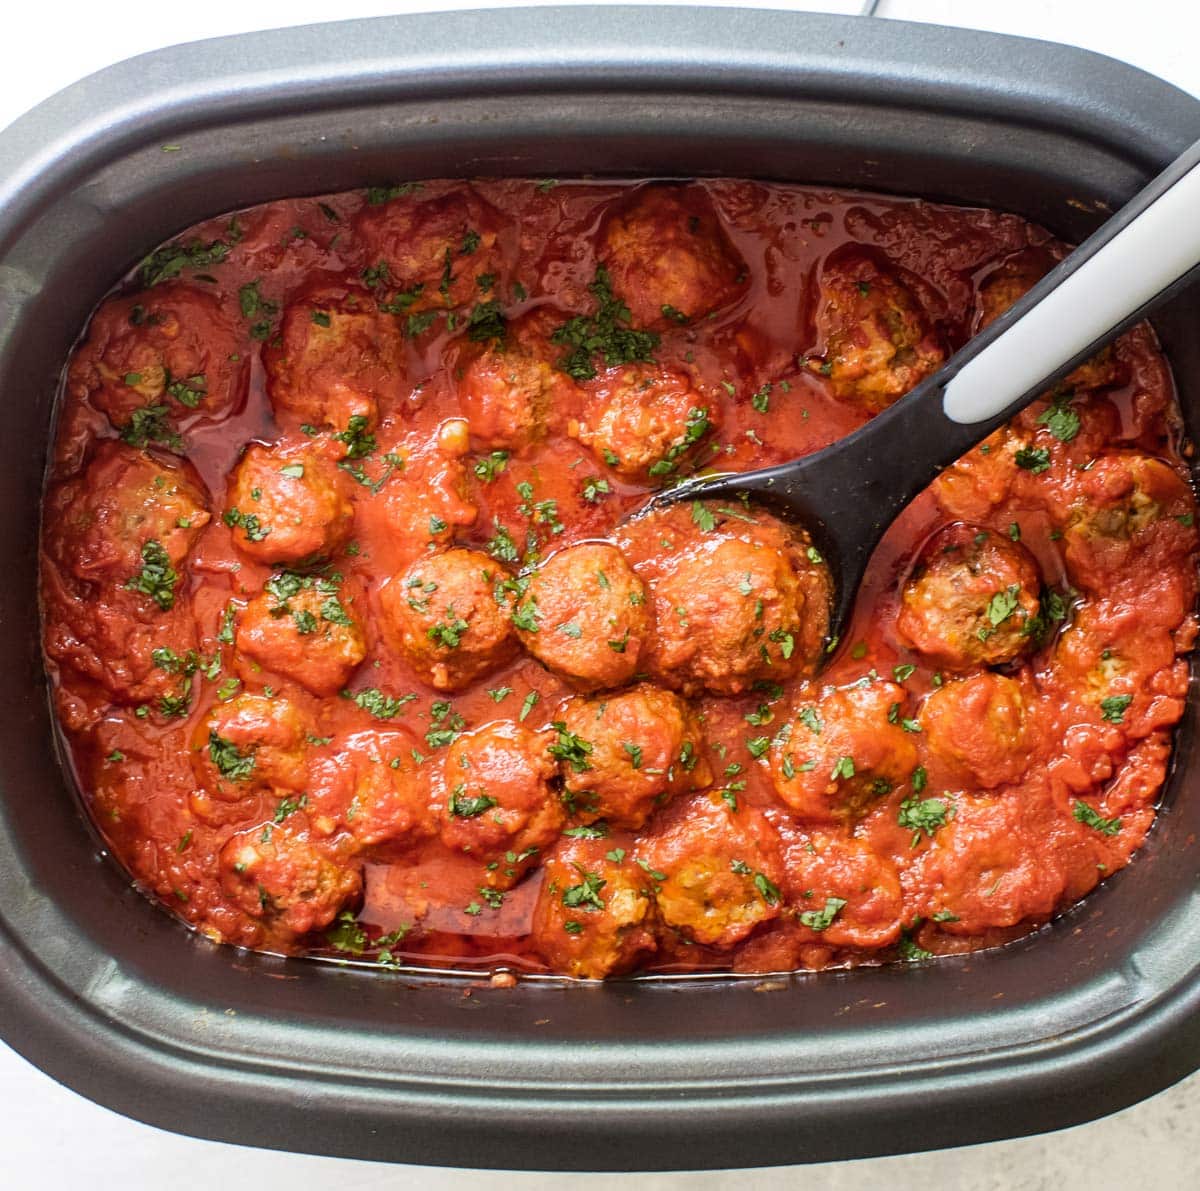 meatballs and sauce in a slow cooker.